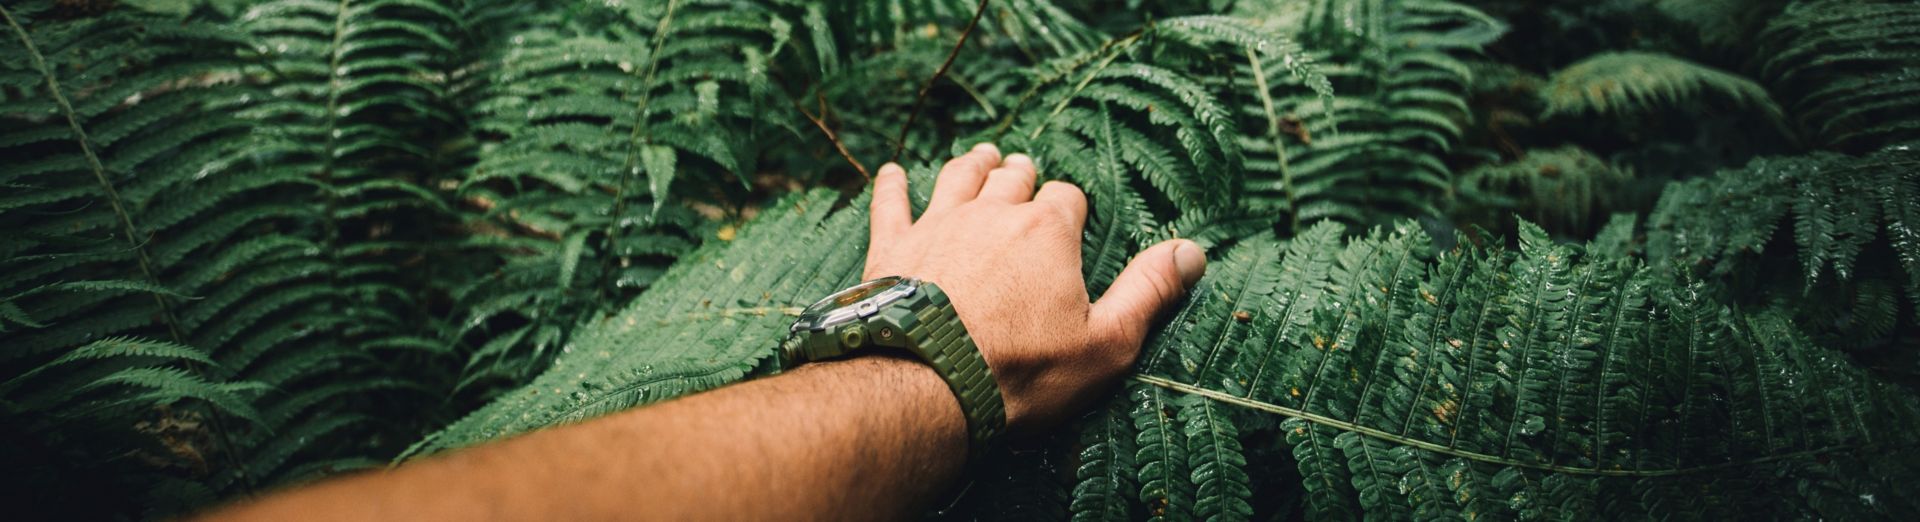 A man’s arm seen holding down fern leaves in a jungle.